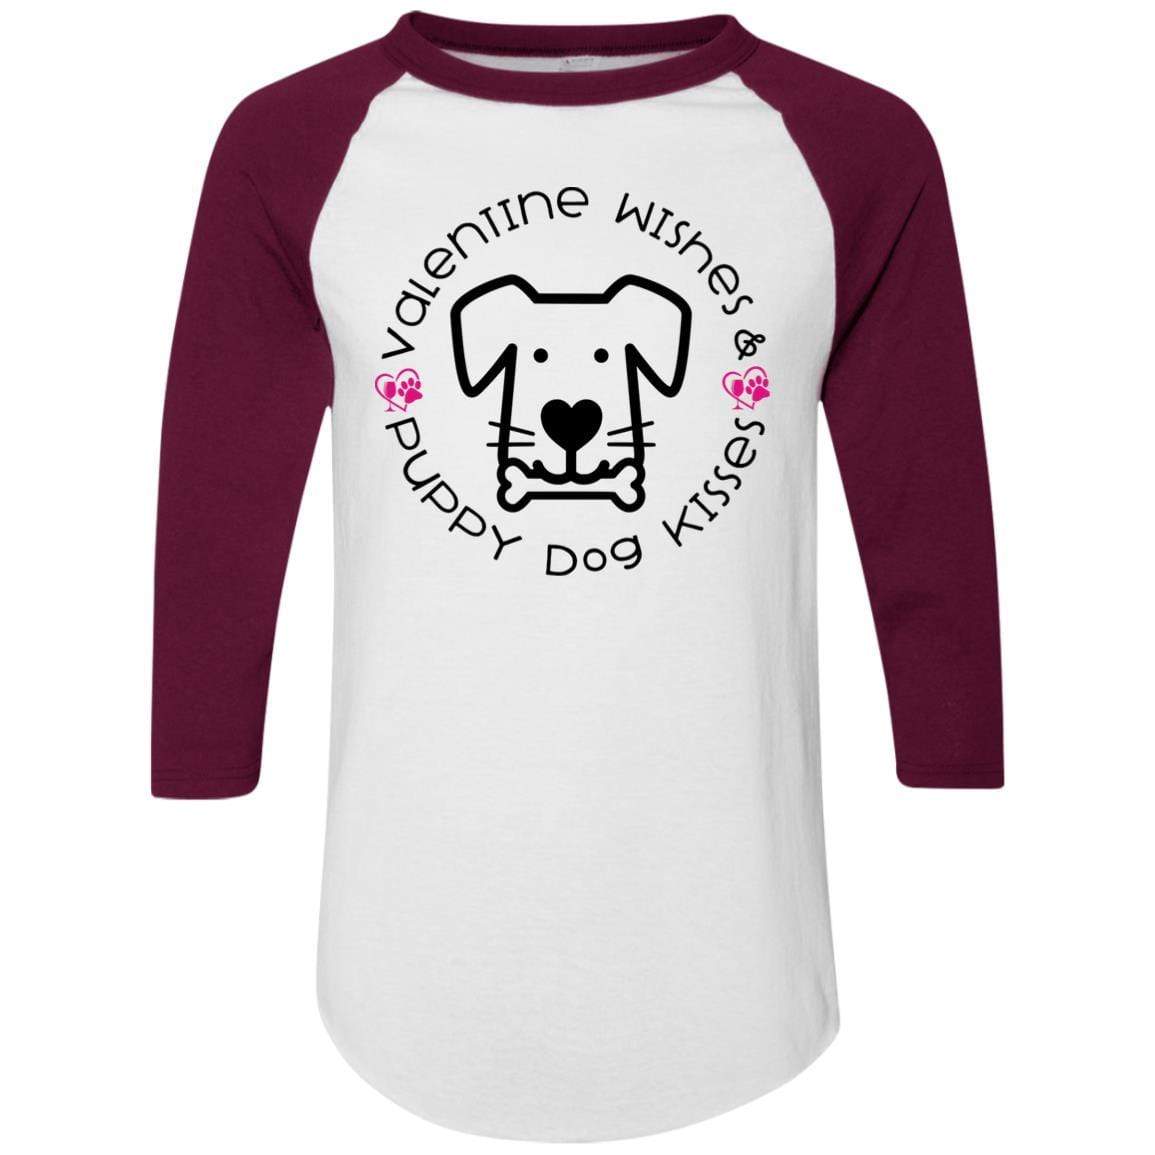 T-Shirts White/Maroon / S Winey Bitches Co 'Valentine Wishes and Puppy Dog Kisses" (Dog) Colorblock Raglan Jersey WineyBitchesCo